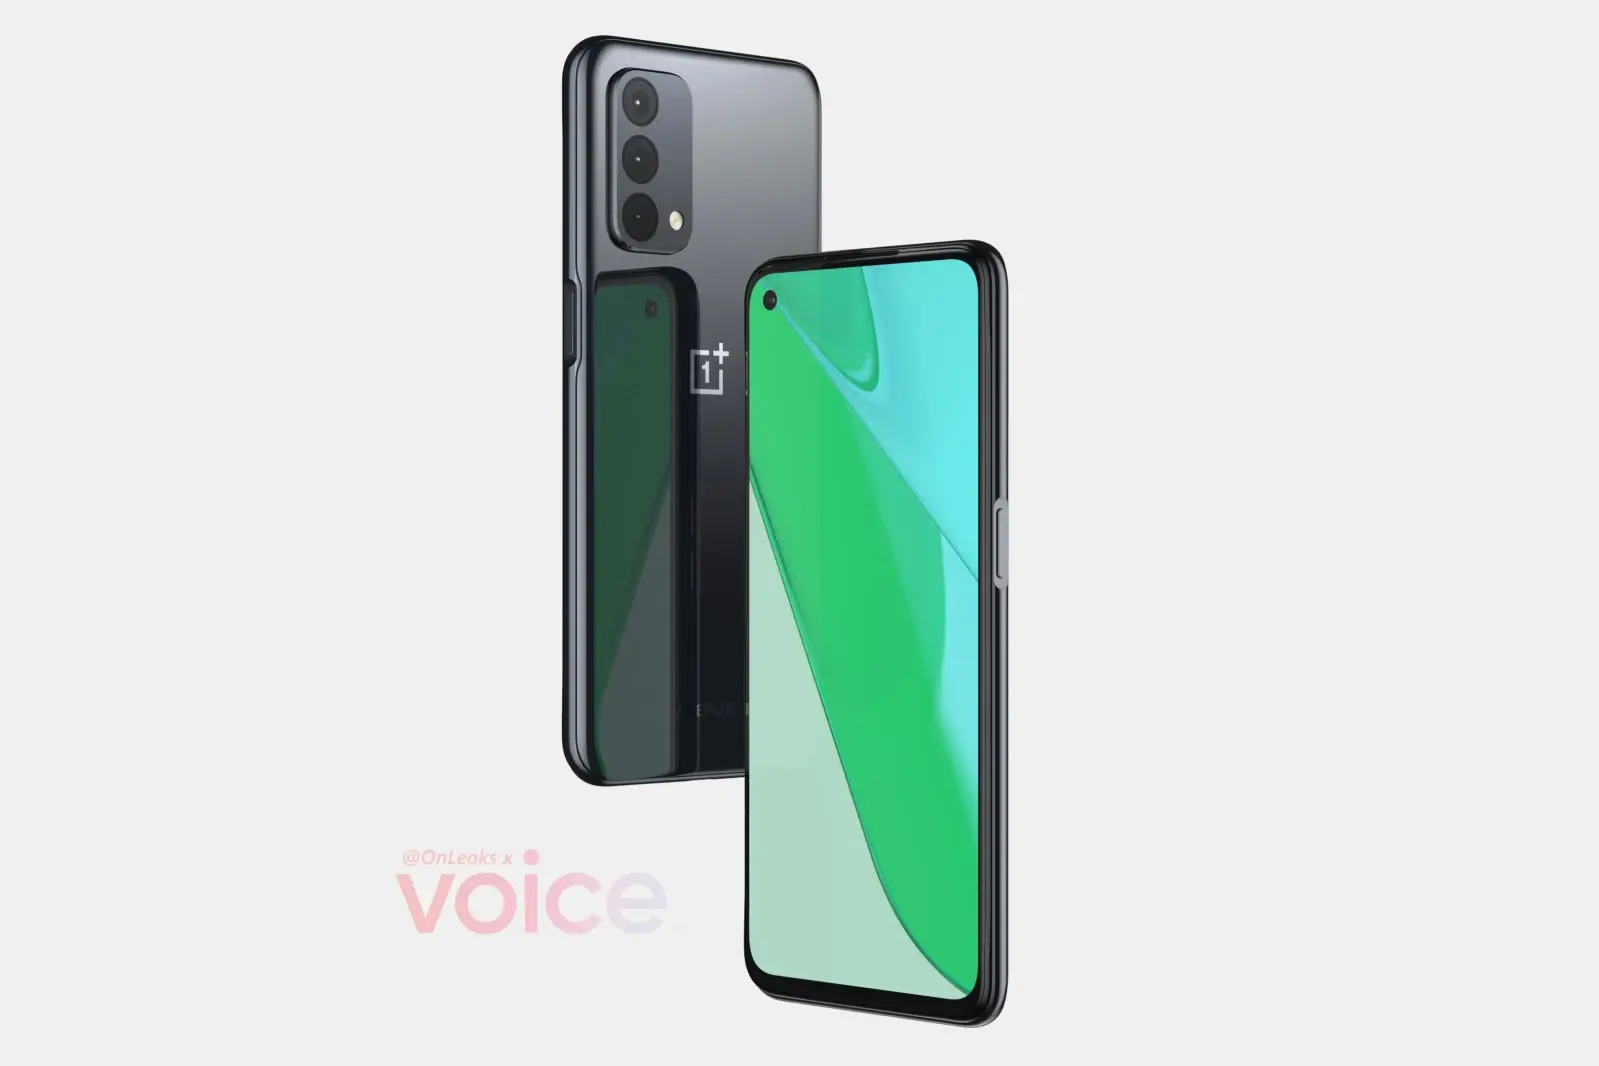 OnePlus CE 5G CAD-based render - Here's what OnePlus' next budget 5G phone could be called